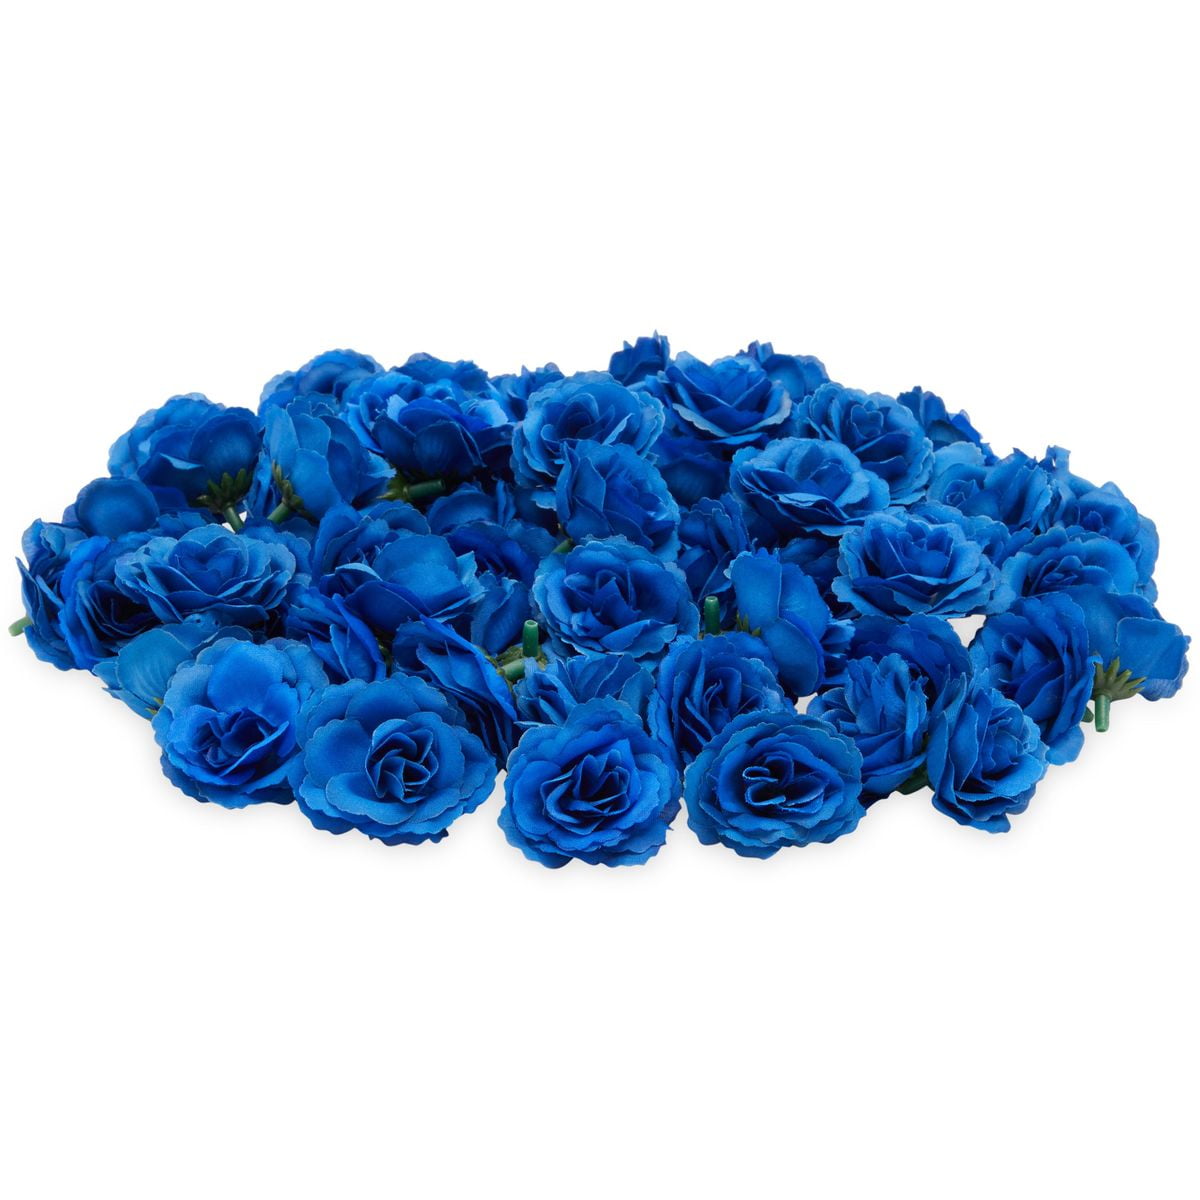 Camellia Blue Green Flowers Head 10-100Pack Artificial 2 Inch Silk Rose Flowers Heads for Wedding Decorations Baby Showers DIY Crafts